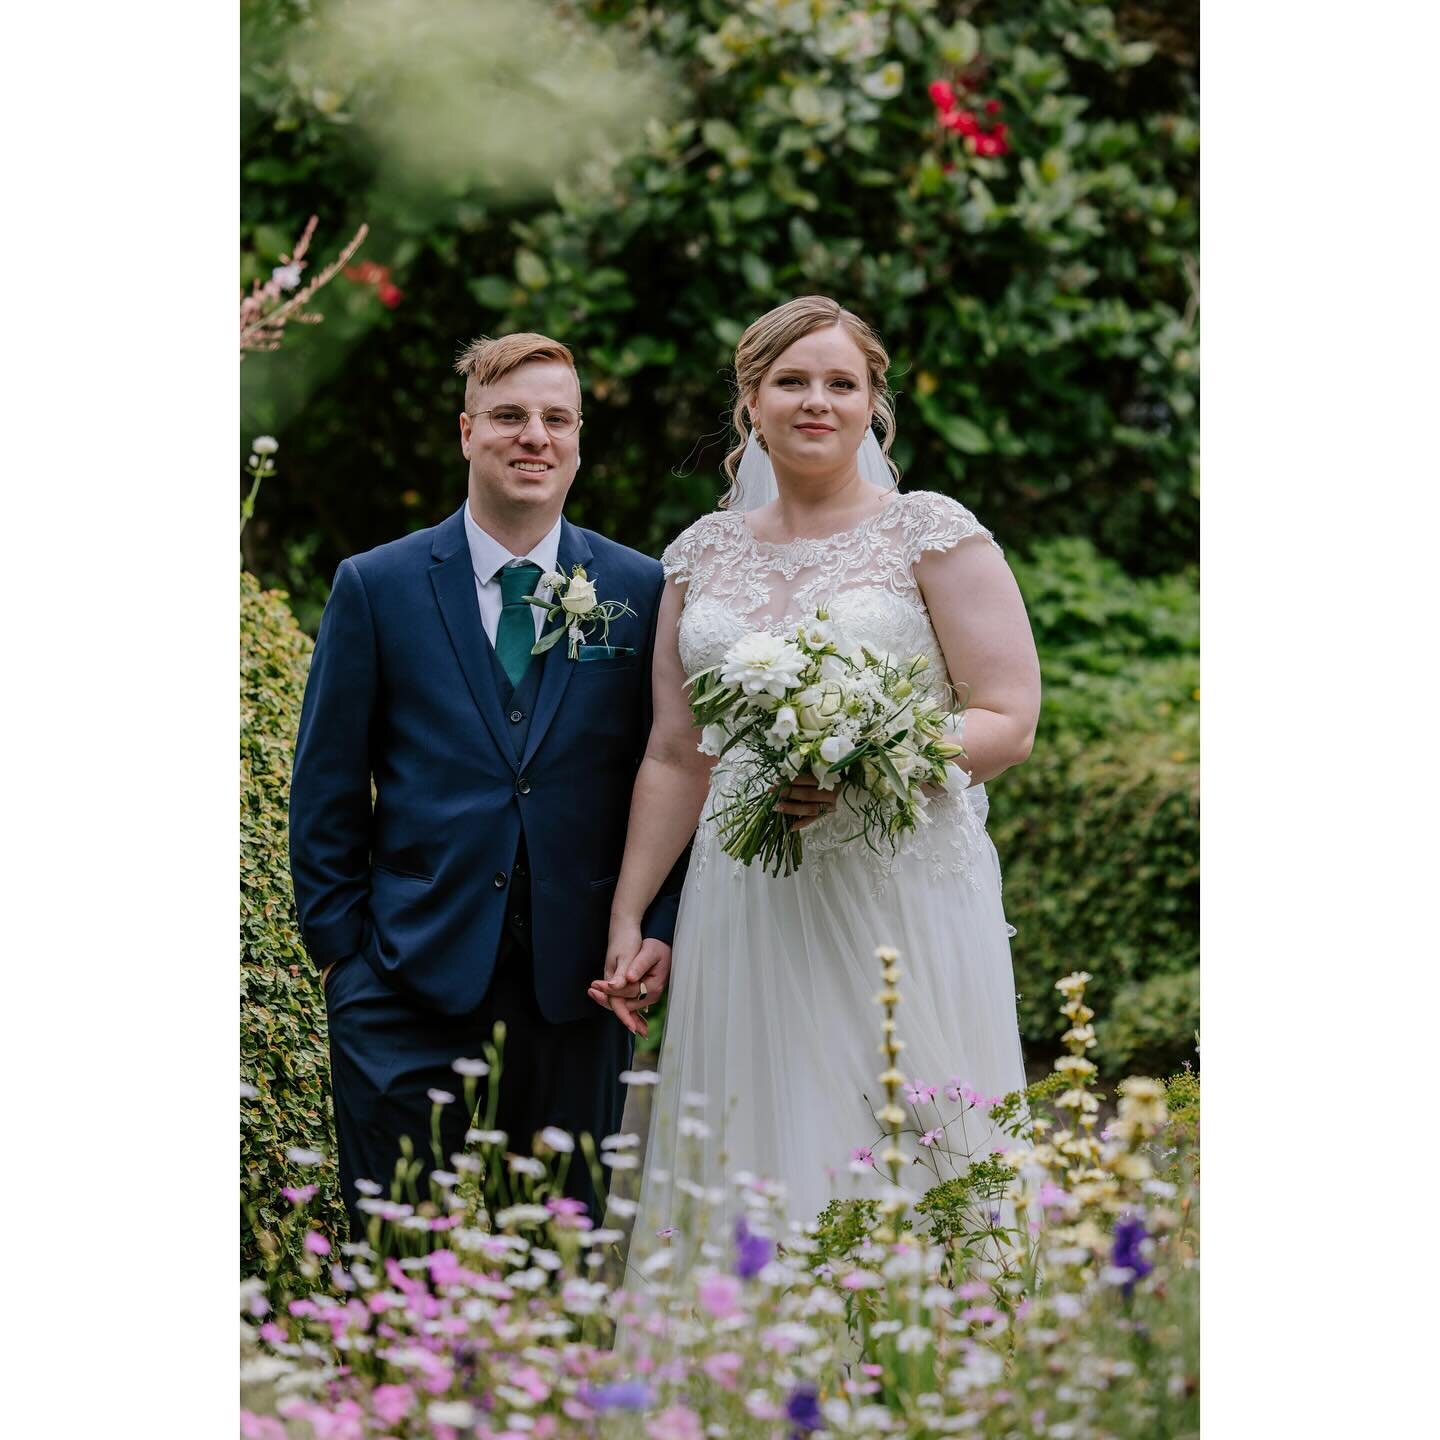 Congratulations Courtney and Thomas on your #firstweddinganniversary #05122022
💚
Such a wonderful day at @highwic&hellip;.. sunshine, loved ones, champagne from @quartzreefwines and a yummy cake!
💚
Here is a glimpse of some of my favourite outdoor 